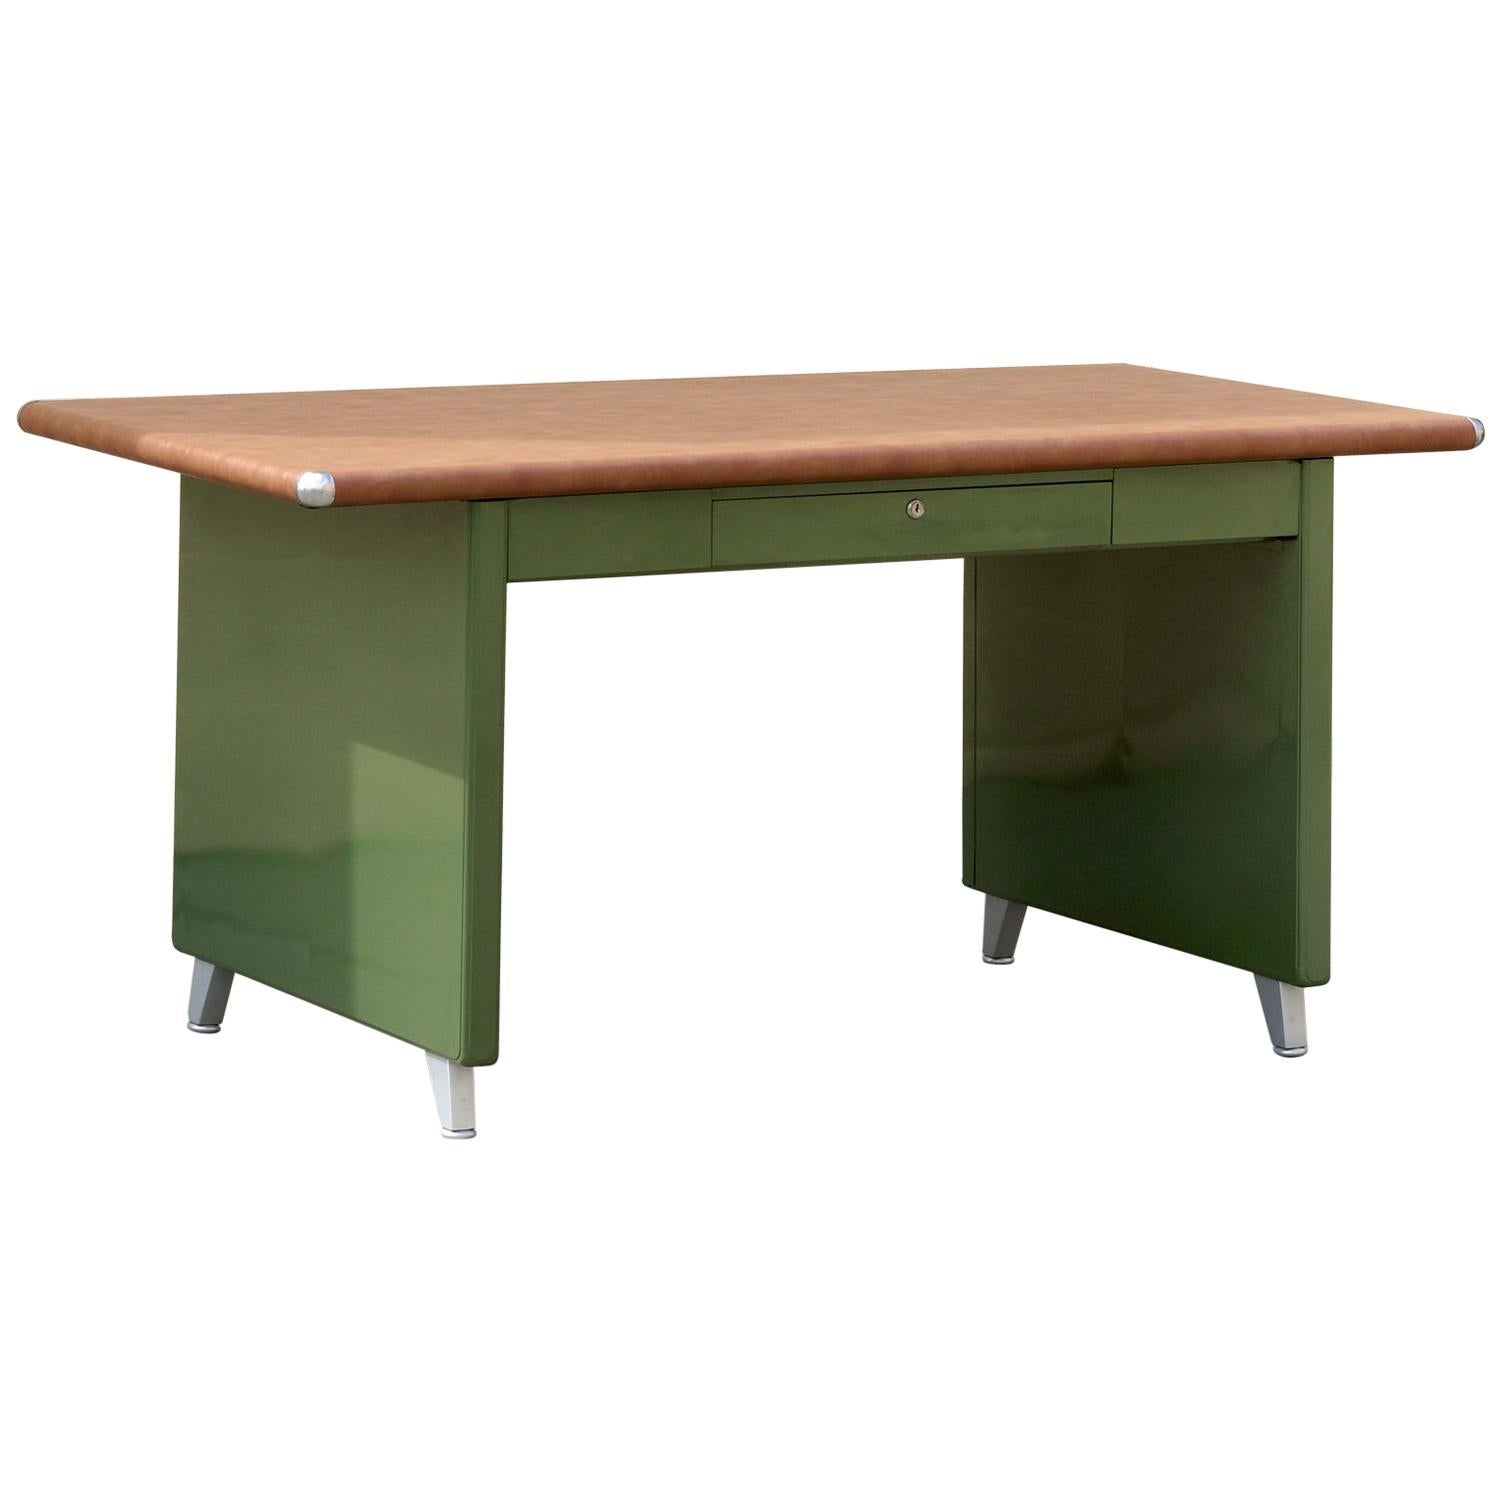 1940s Shaw Walker Panel Leg Tanker Table, Refinished in Army Green